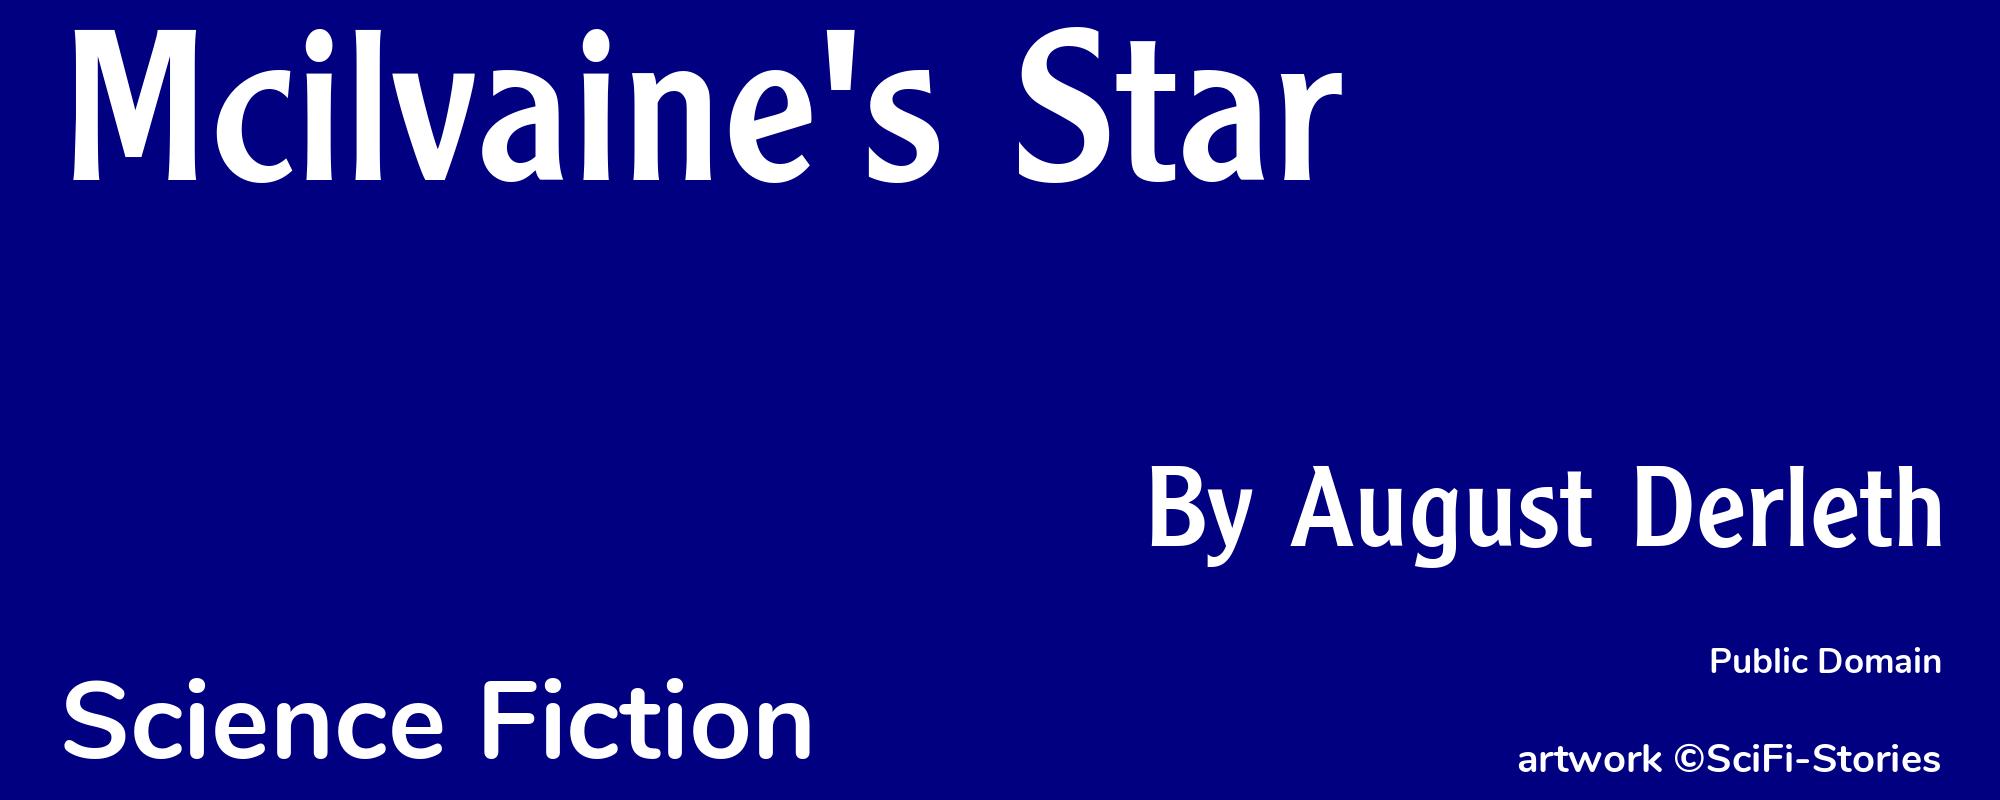 Mcilvaine's Star - Cover